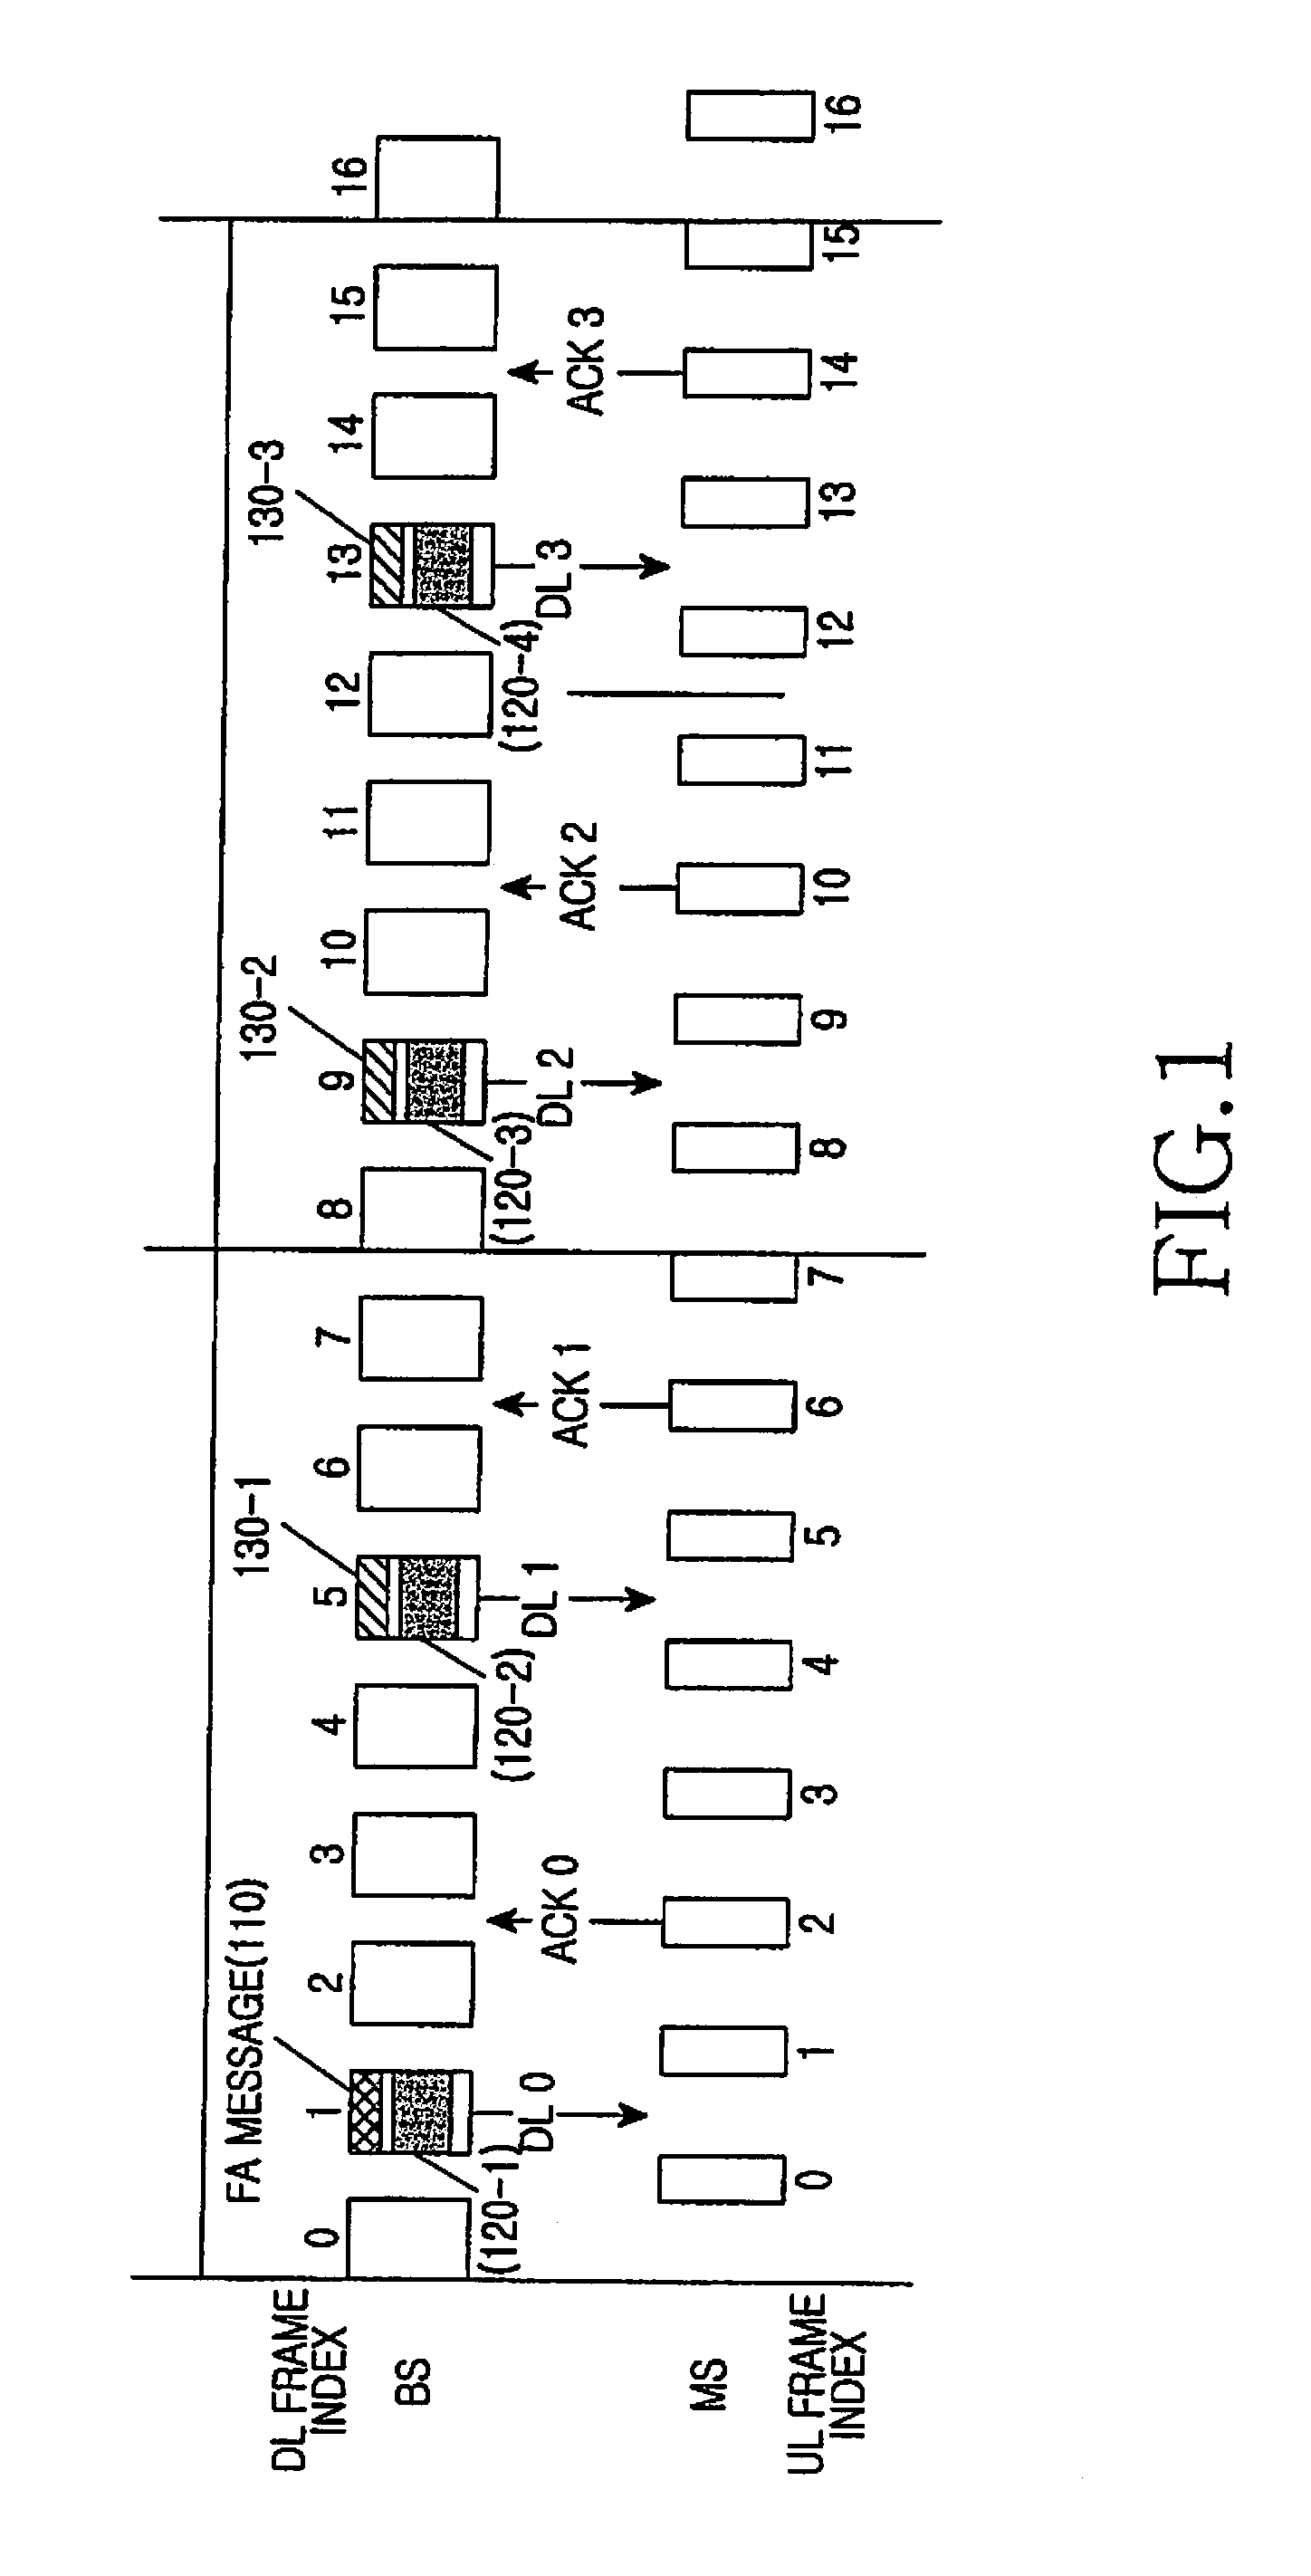 Apparatus and method for hybrid automatic repeat request signaling in broadband wireless communication system